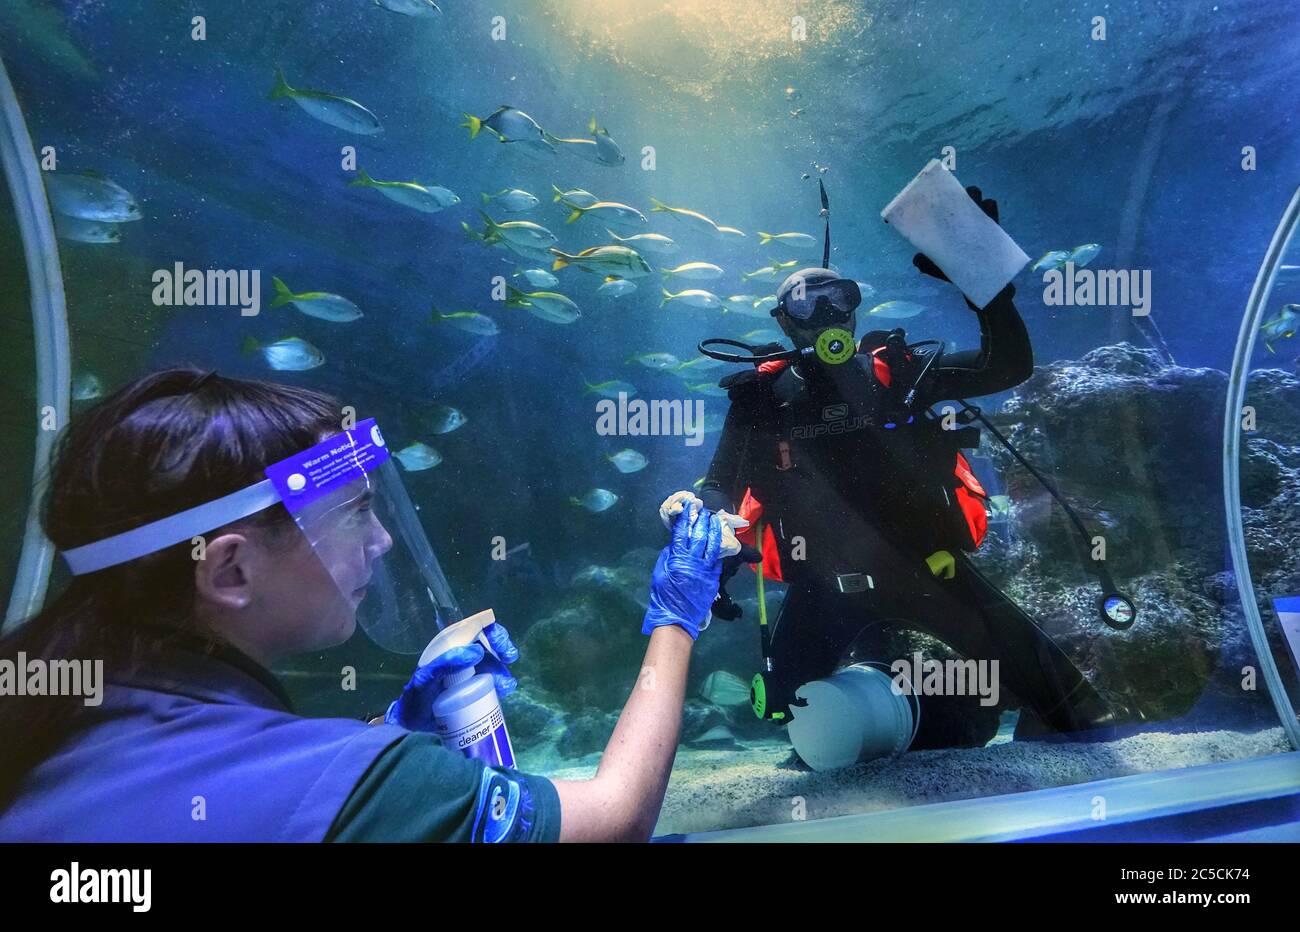 Susie Lovvick-Earle, a member of staff at Tynemouth Aquarium in North Shields, wears personal protective equipment (PPE) to clean the windows of the ocean tank along with a diver, as it prepares to open on Saturday after further coronavirus lockdown restrictions are lifted in England. Stock Photo